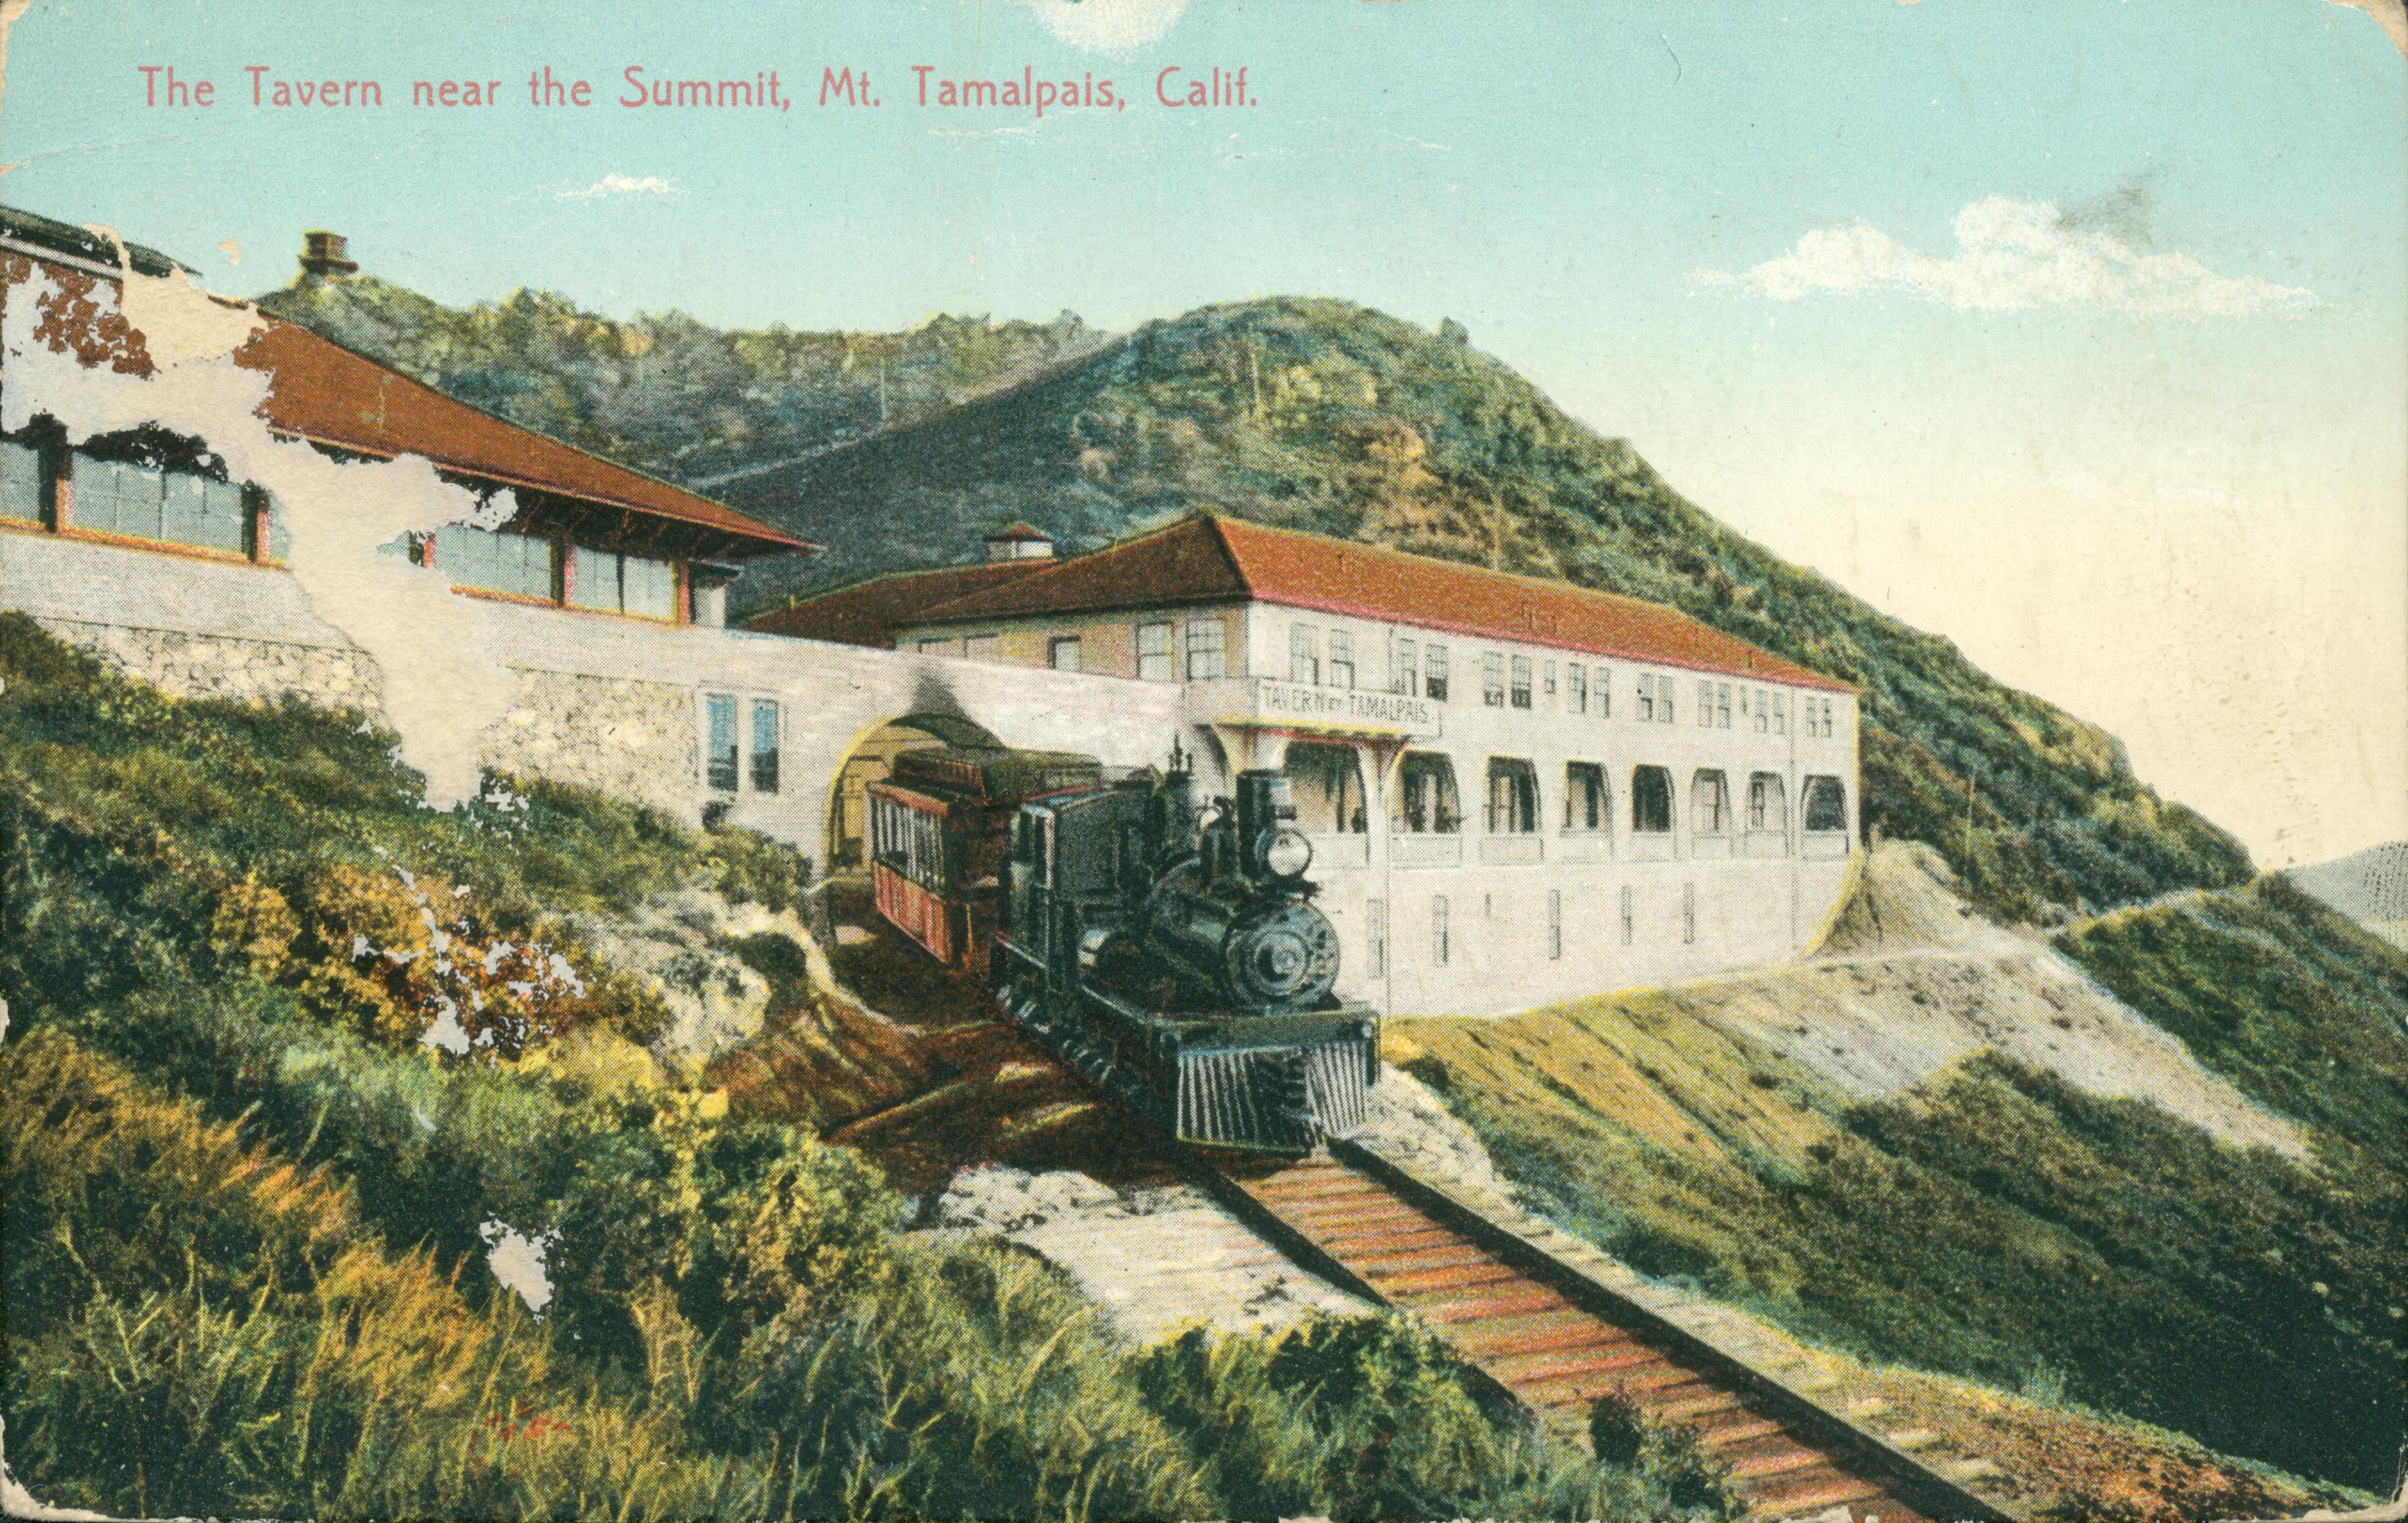 View of Mt. Tamalpais, trees, hills and buildings in background, train and train tracks in foreground